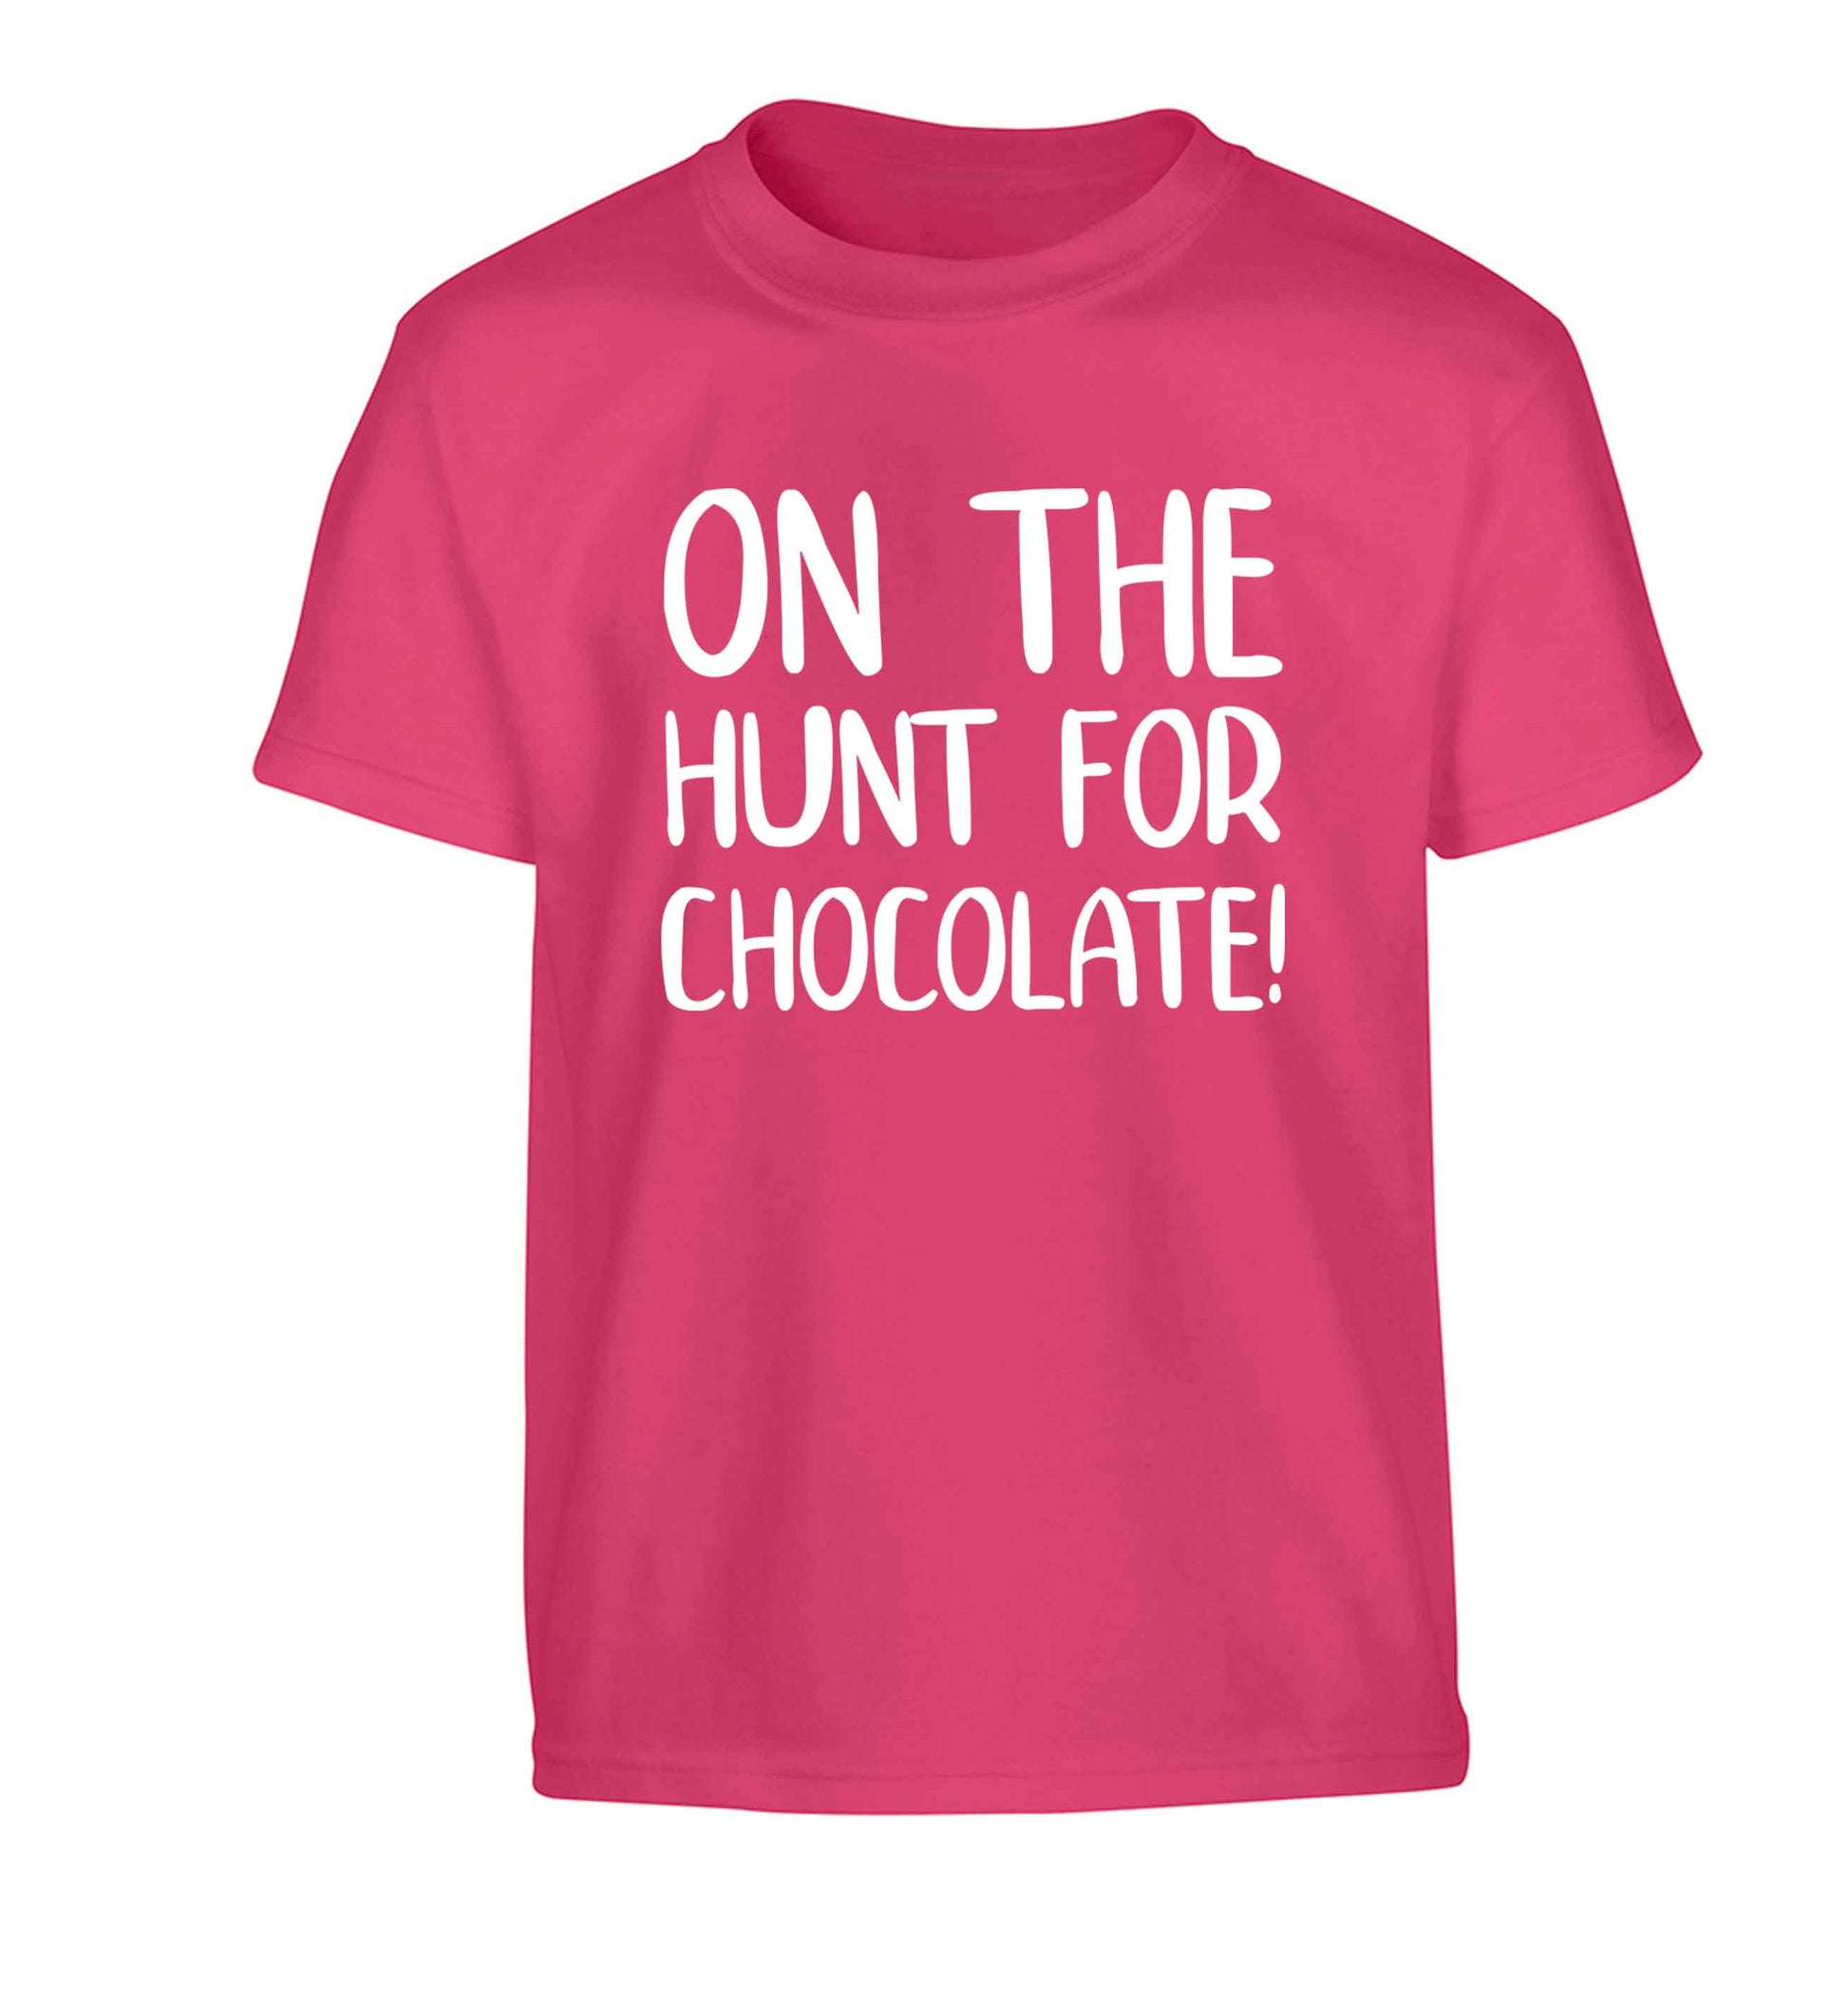 On the hunt for chocolate! Children's pink Tshirt 12-13 Years